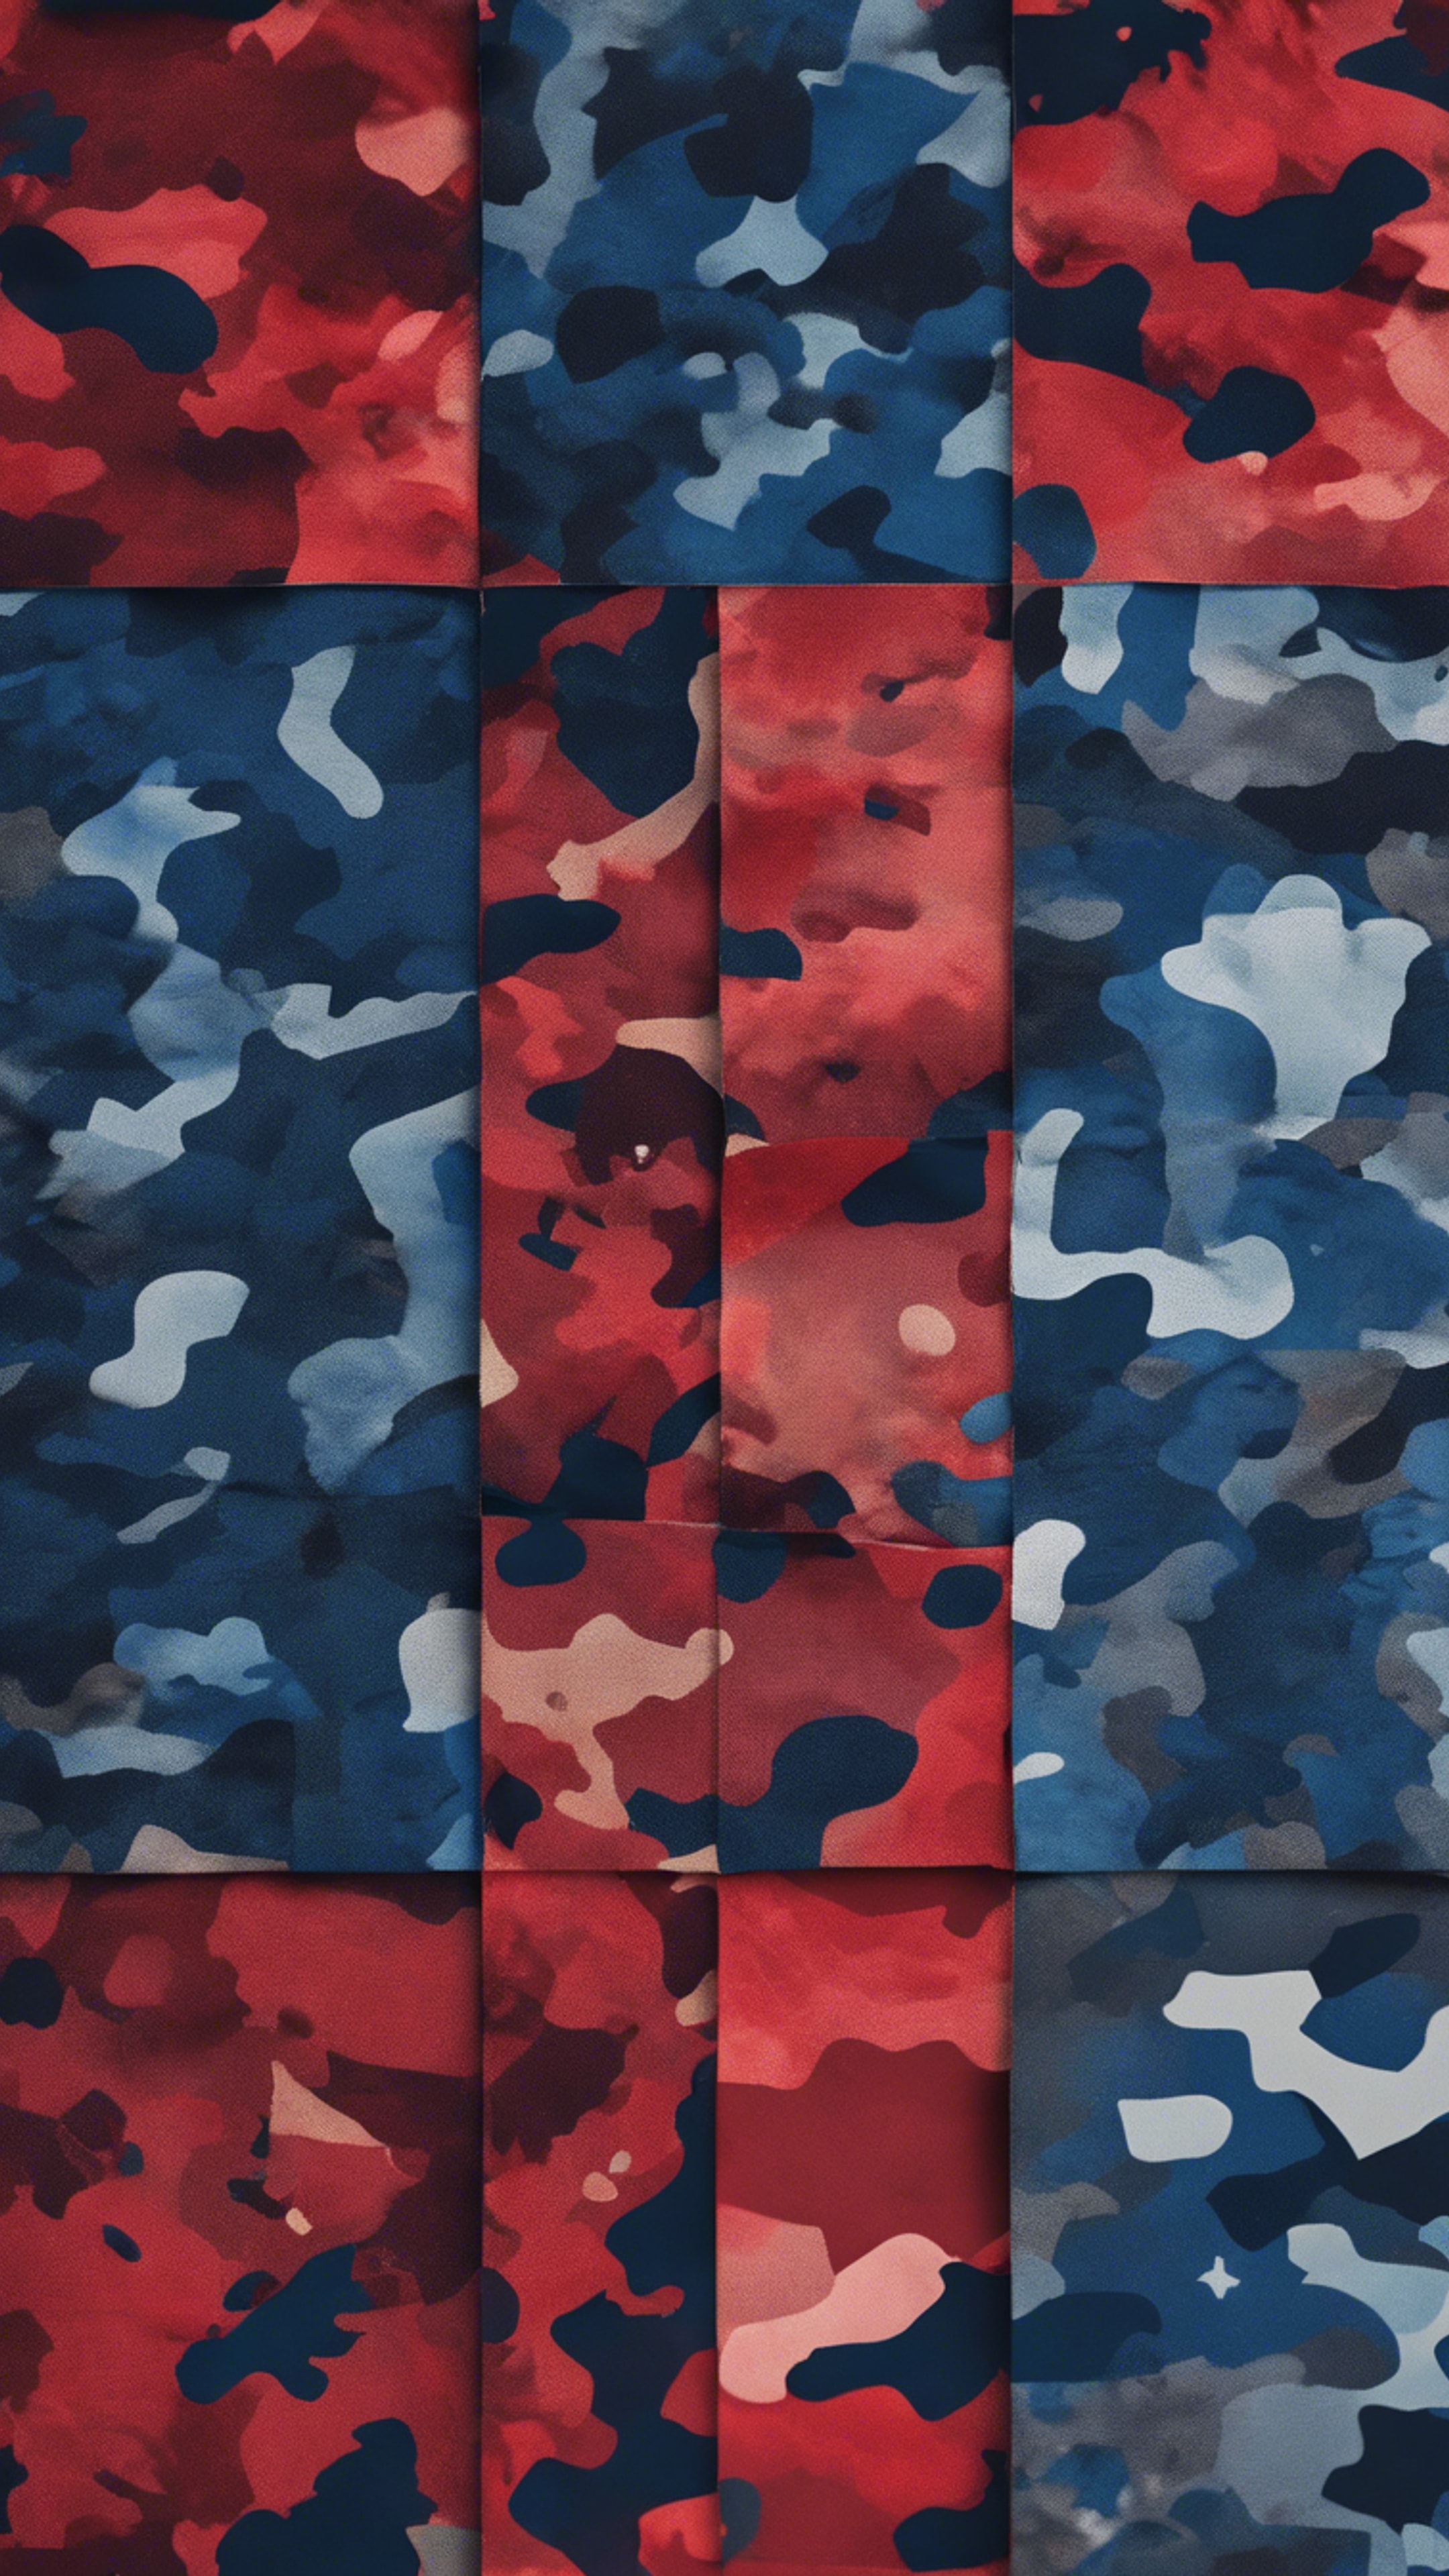 Wide patches of red and blue in a modernized camouflage pattern. Валлпапер[bf2d18a8e46c447ea6e3]